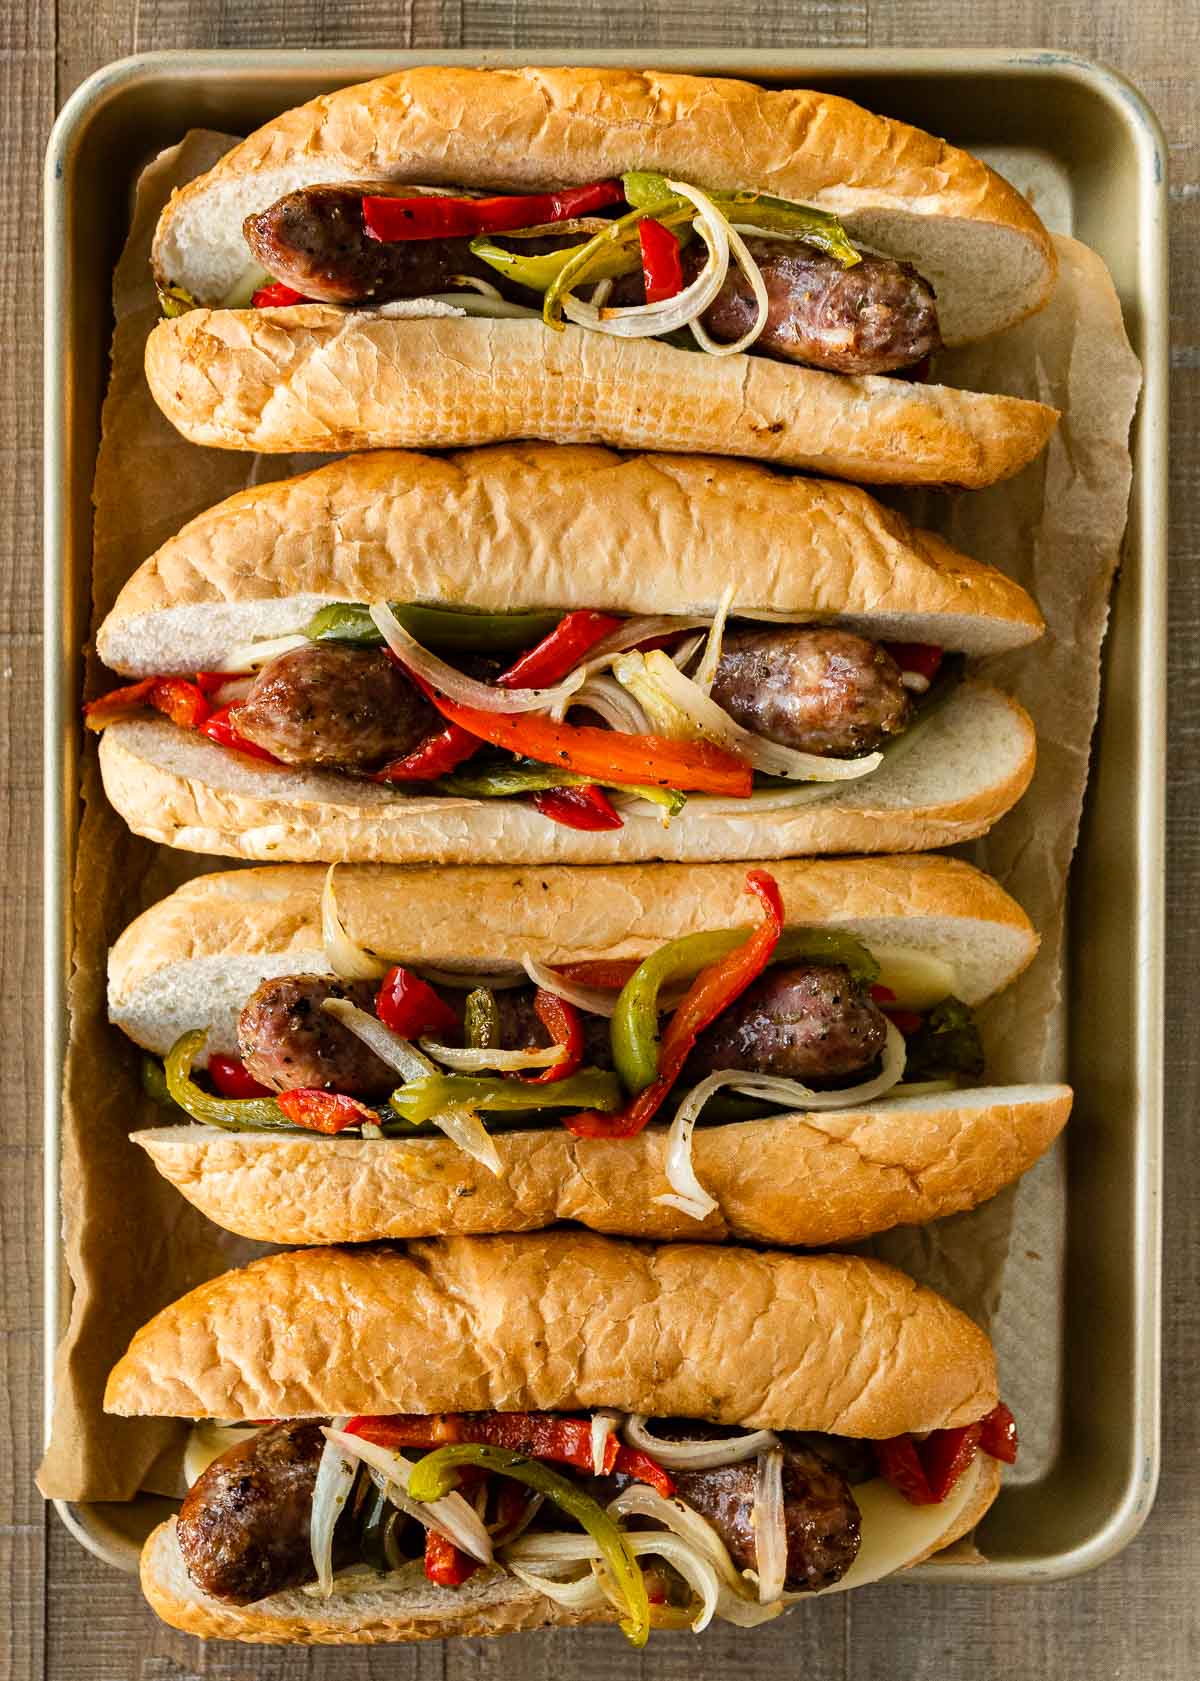 Sheet Pan Sausage and Peppers in hoagie rolls